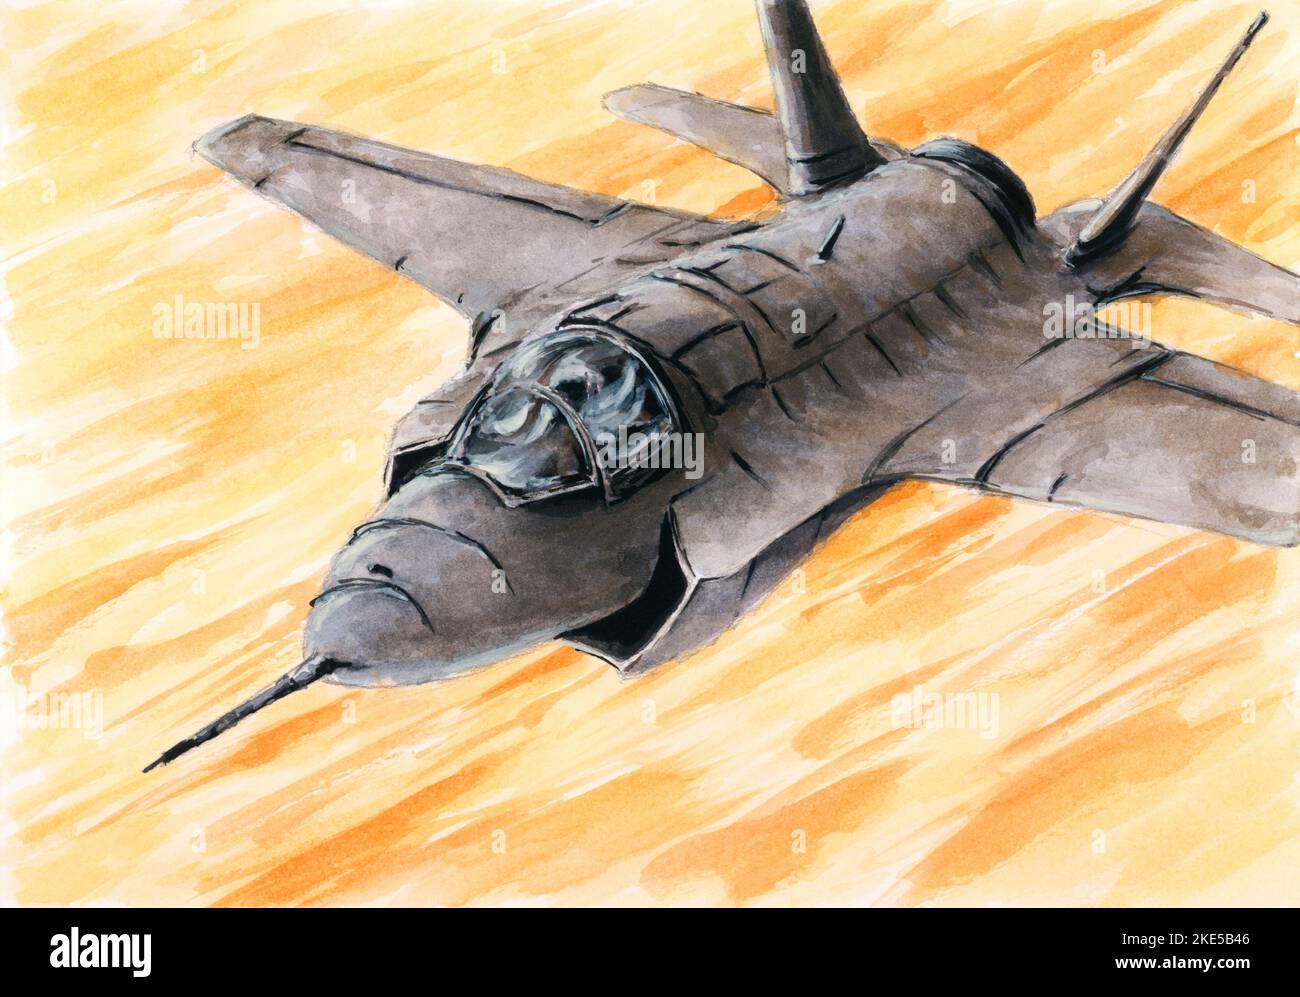 Modern jet fighter in action. Watercolor on paper. Stock Photo